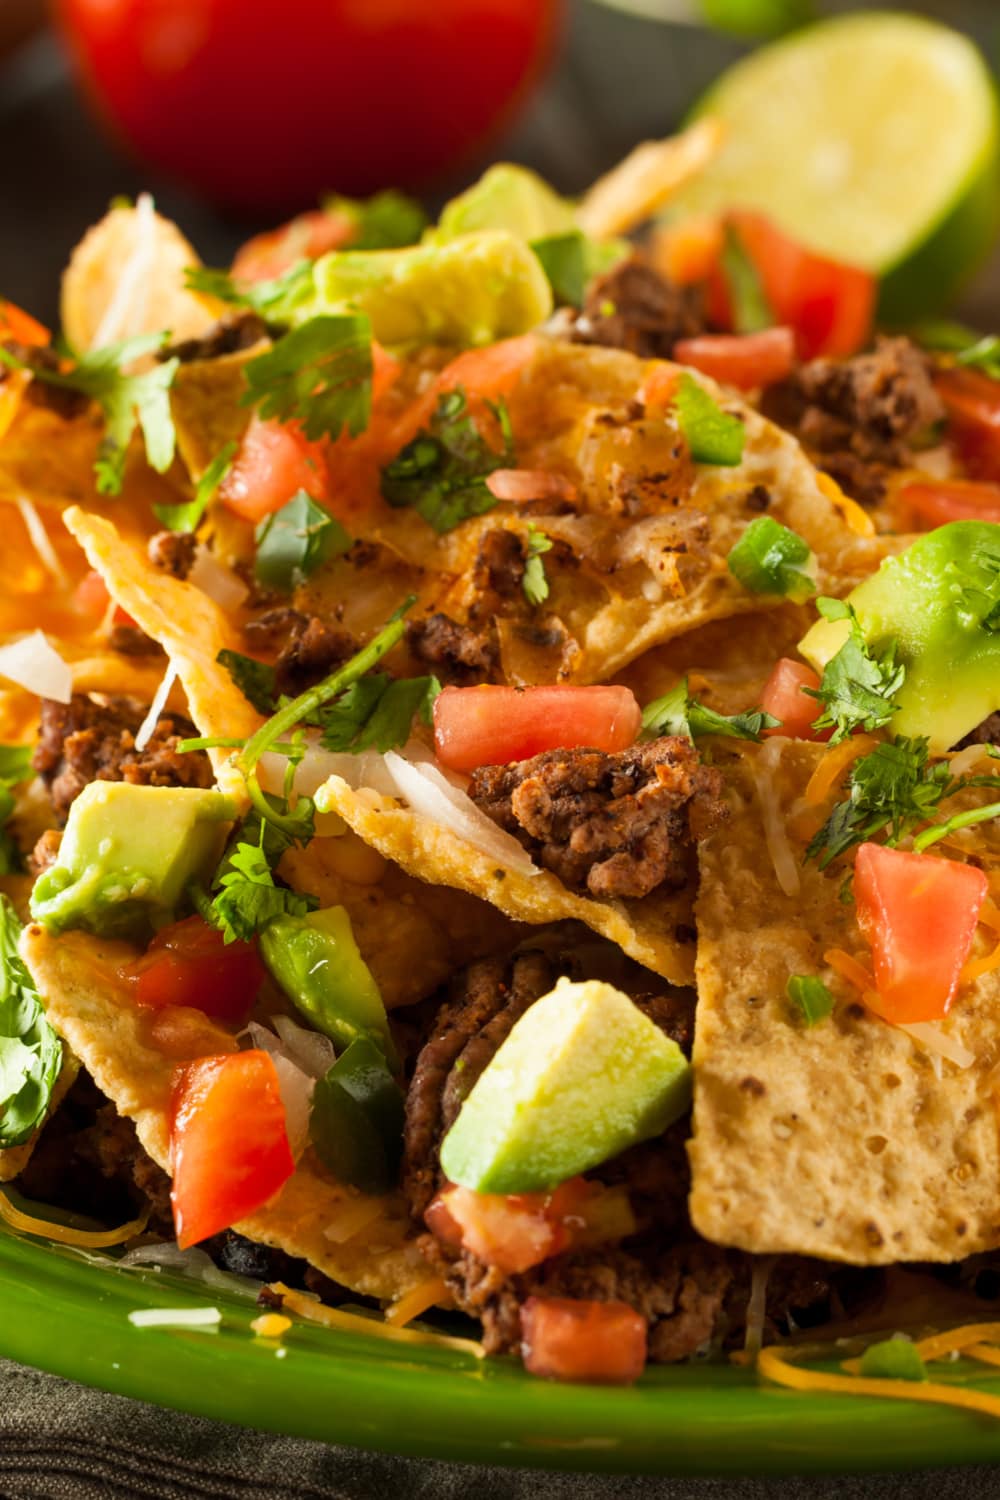 Loaded Nachos with ground beef, avocado slices, spices and chopped parsley. 